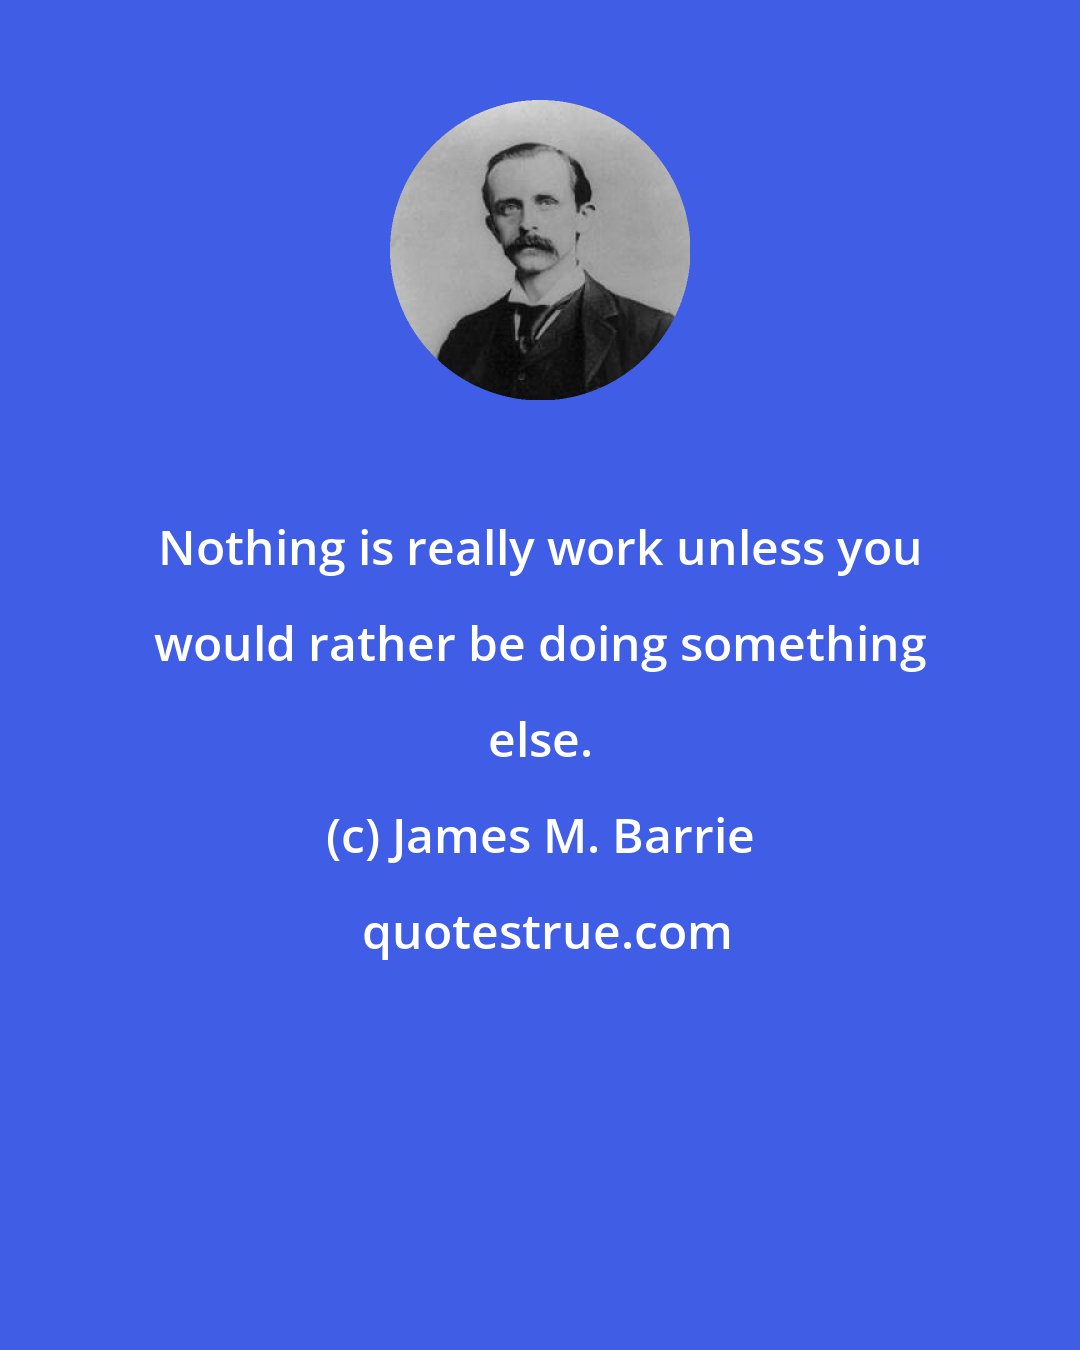 James M. Barrie: Nothing is really work unless you would rather be doing something else.